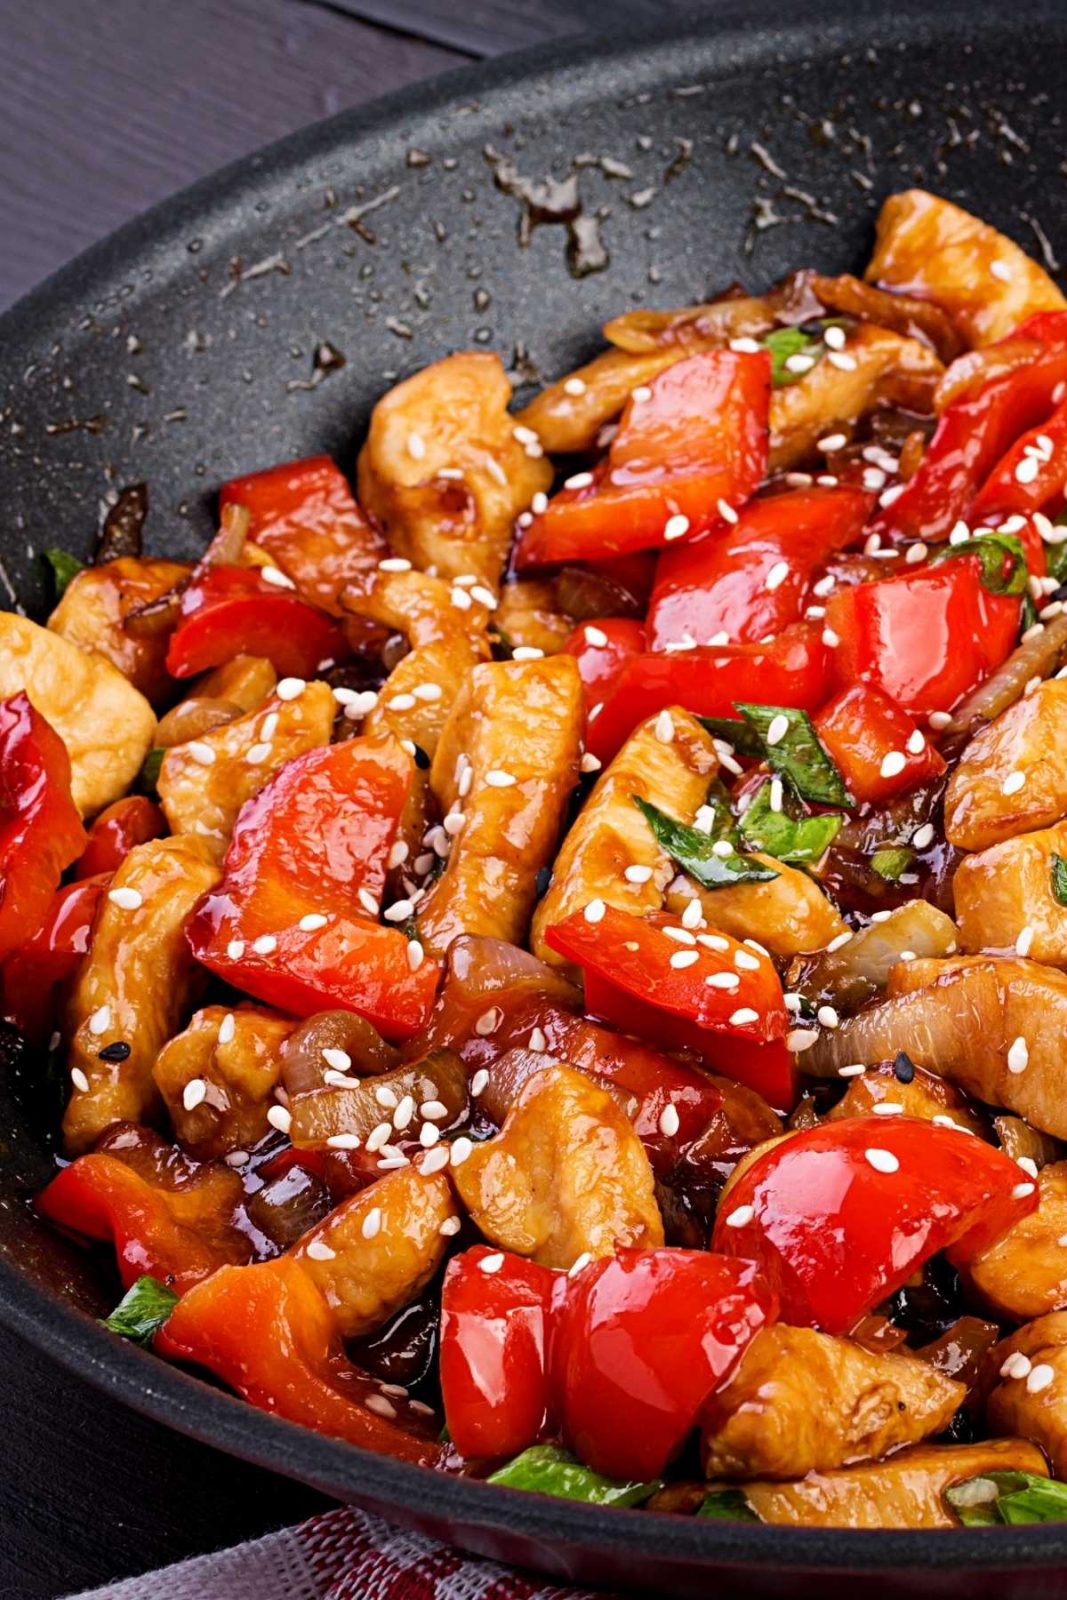 This delicious Tai Chien chicken stir fry is wonderful served with steamed rice. It’s the perfect dish to make on a busy weeknight!